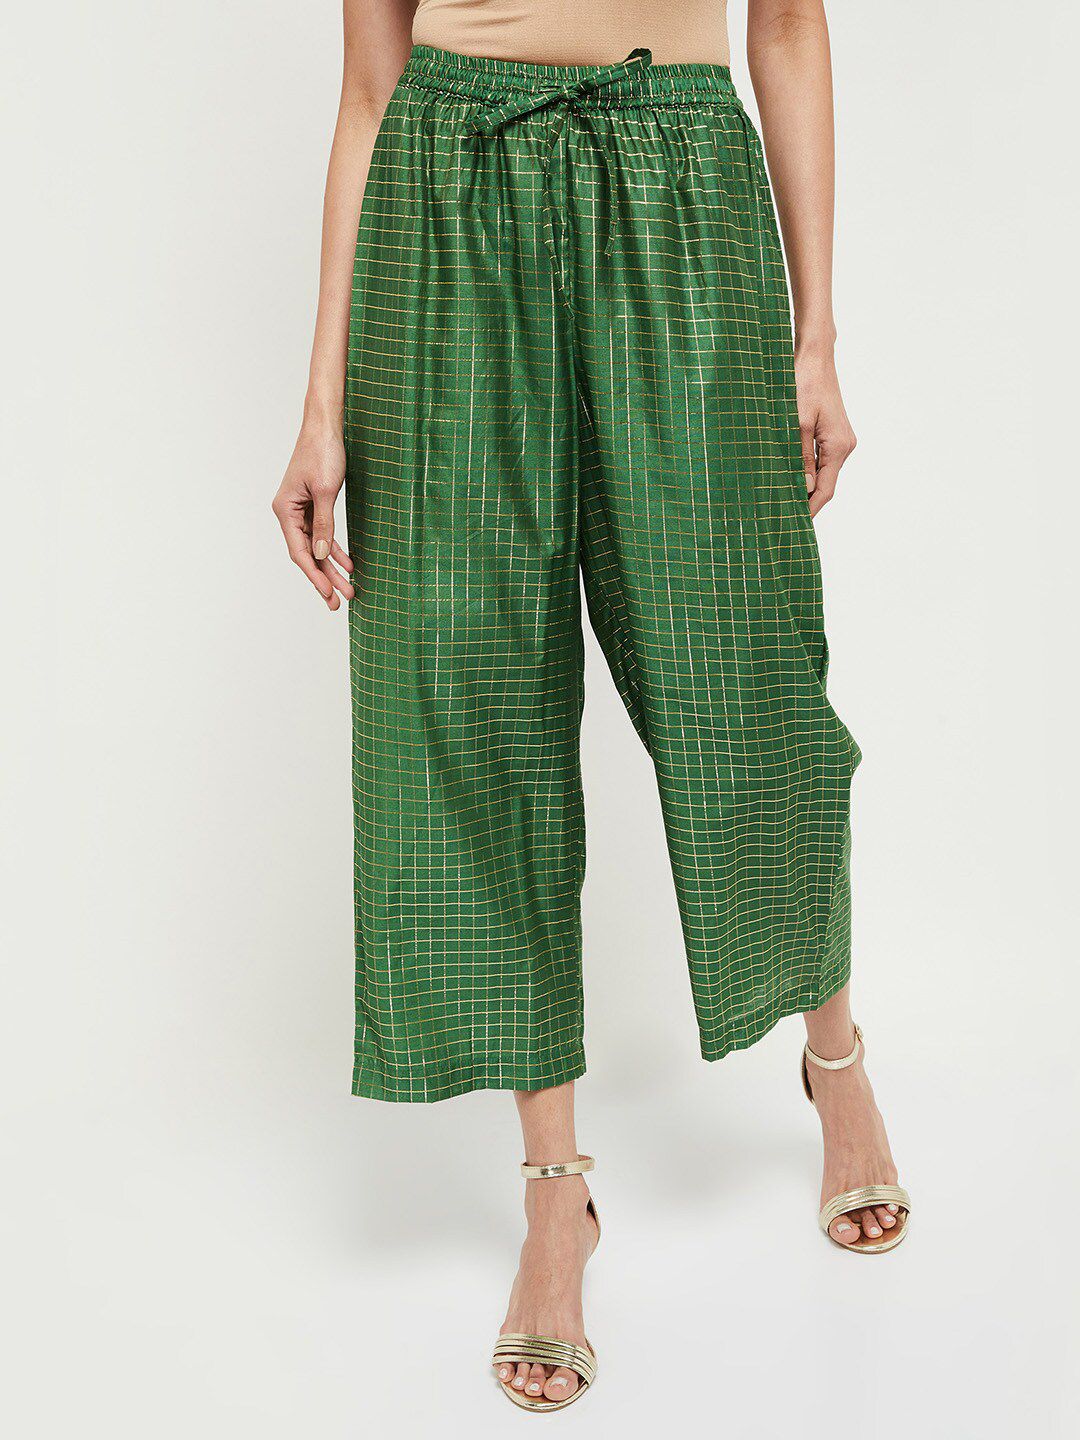 max Women Green & Gold-Toned Checked Ethnic Palazzos Price in India